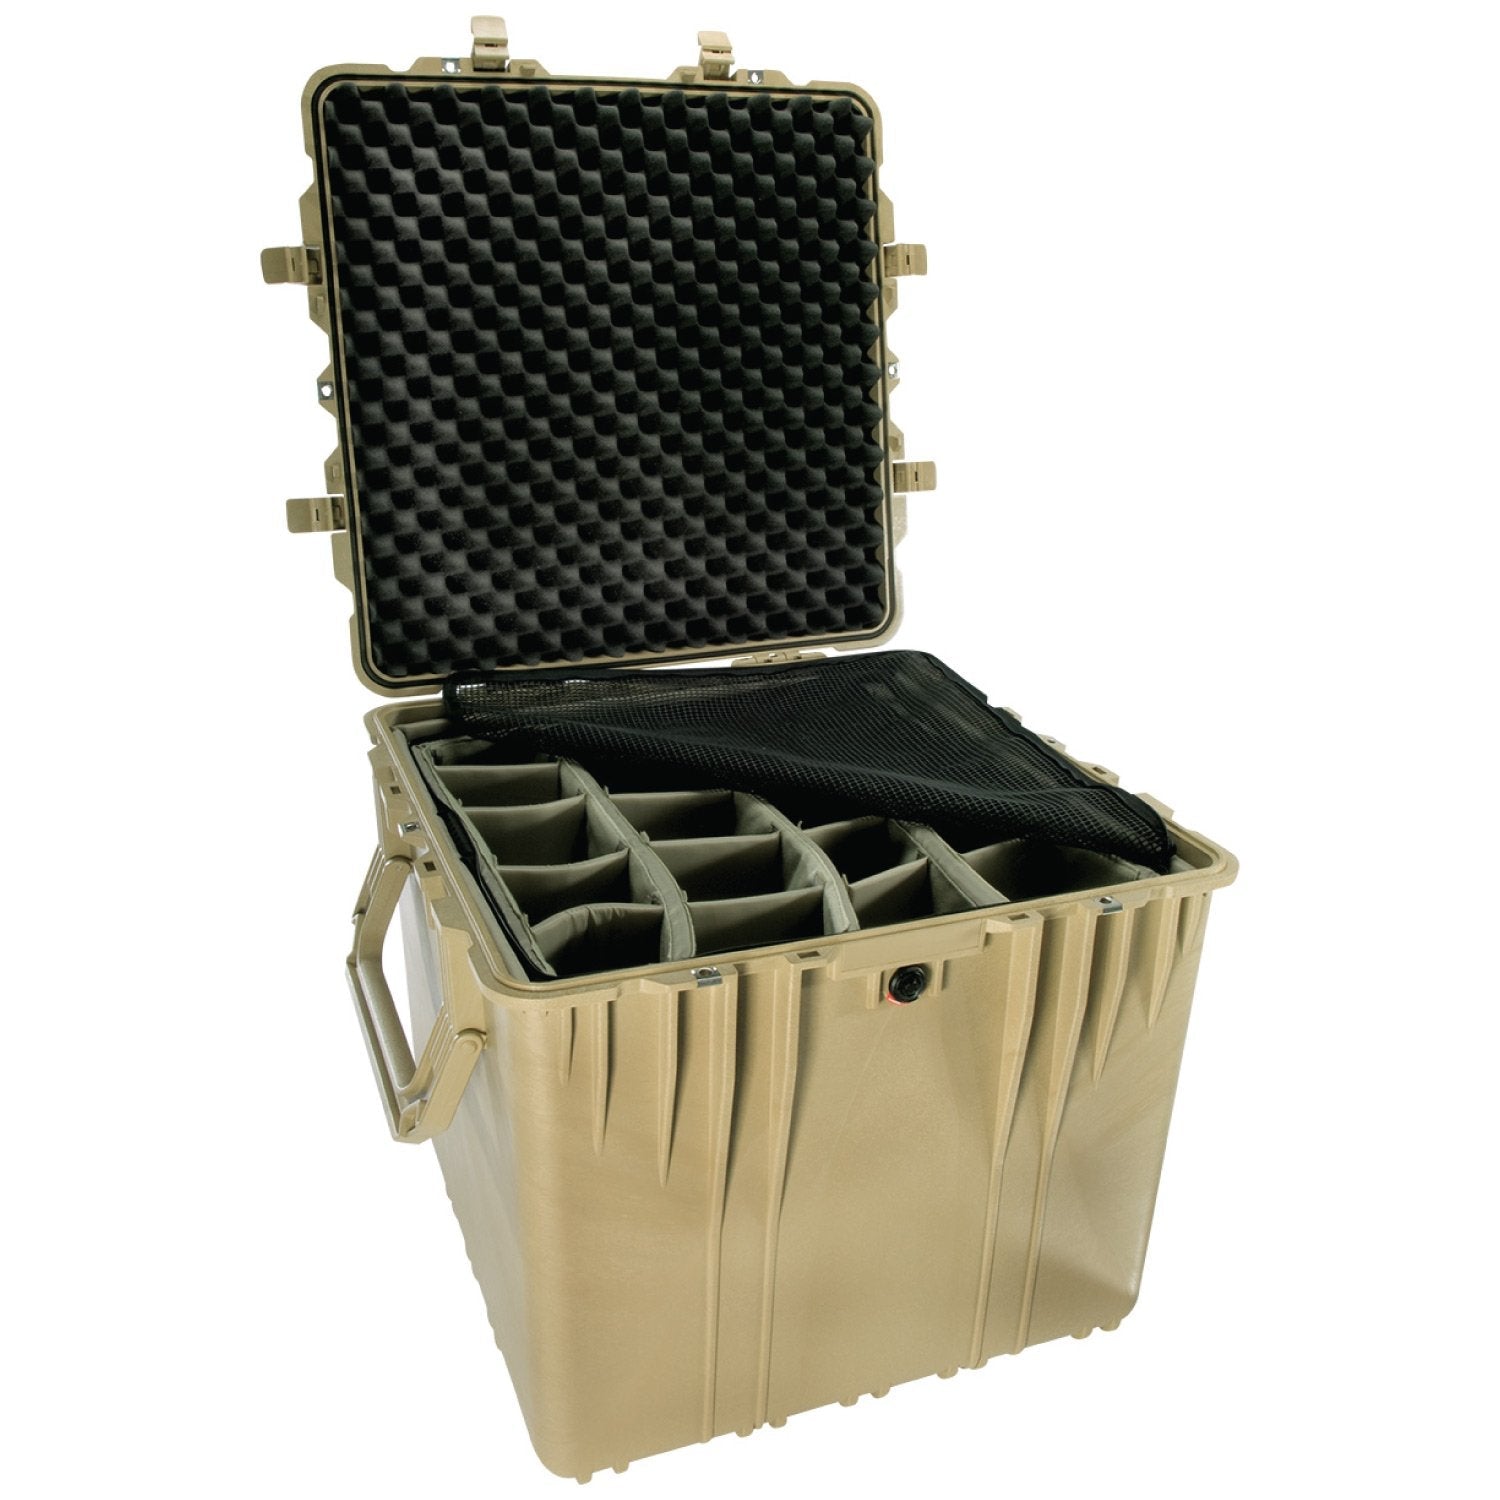 Pelican 0370 Protector Cube Case Desert Tan Bags, Packs and Cases Pelican Products With Padded Divider Set Tactical Gear Supplier Tactical Distributors Australia